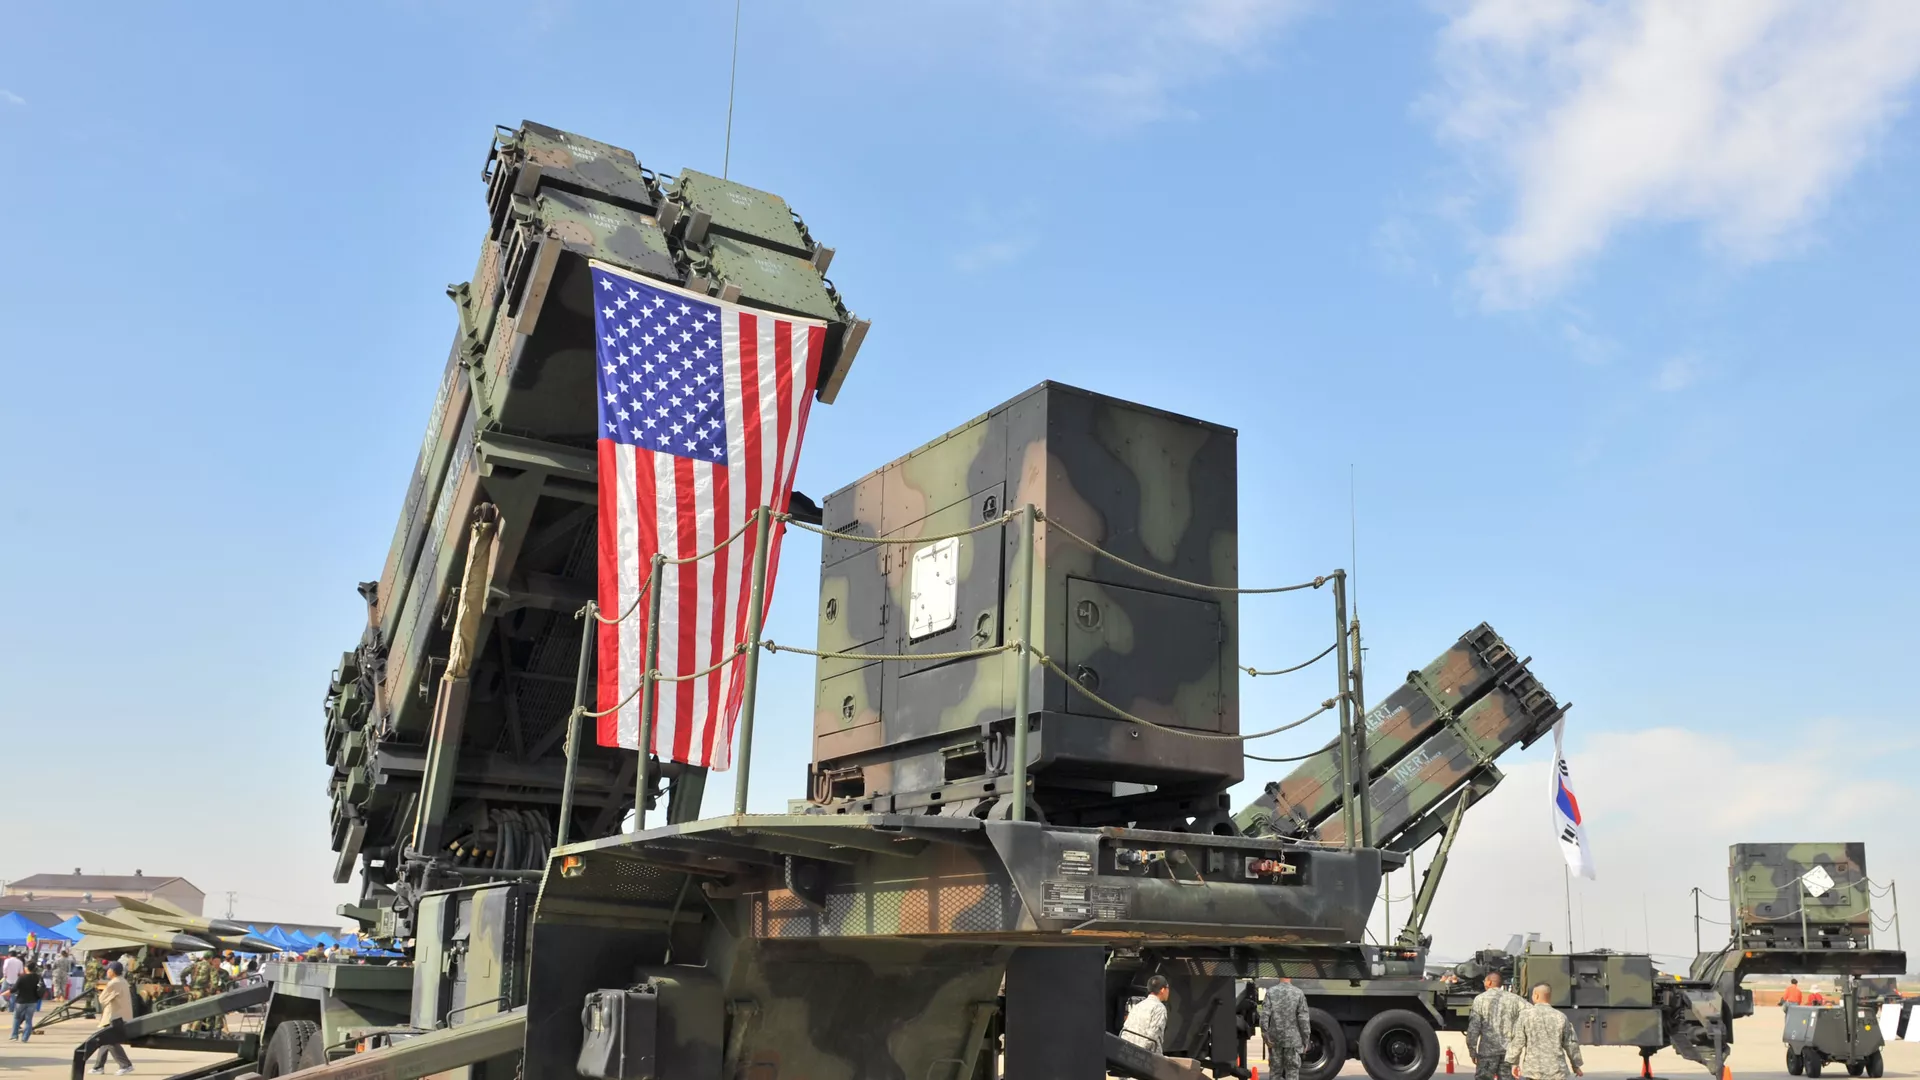 A US Army's Patriot Surface-to Air missile system is displayed during the Air Power Day at the US airbase in Osan, south of Seoul on October 12, 2008 - Sputnik International, 1920, 24.09.2023